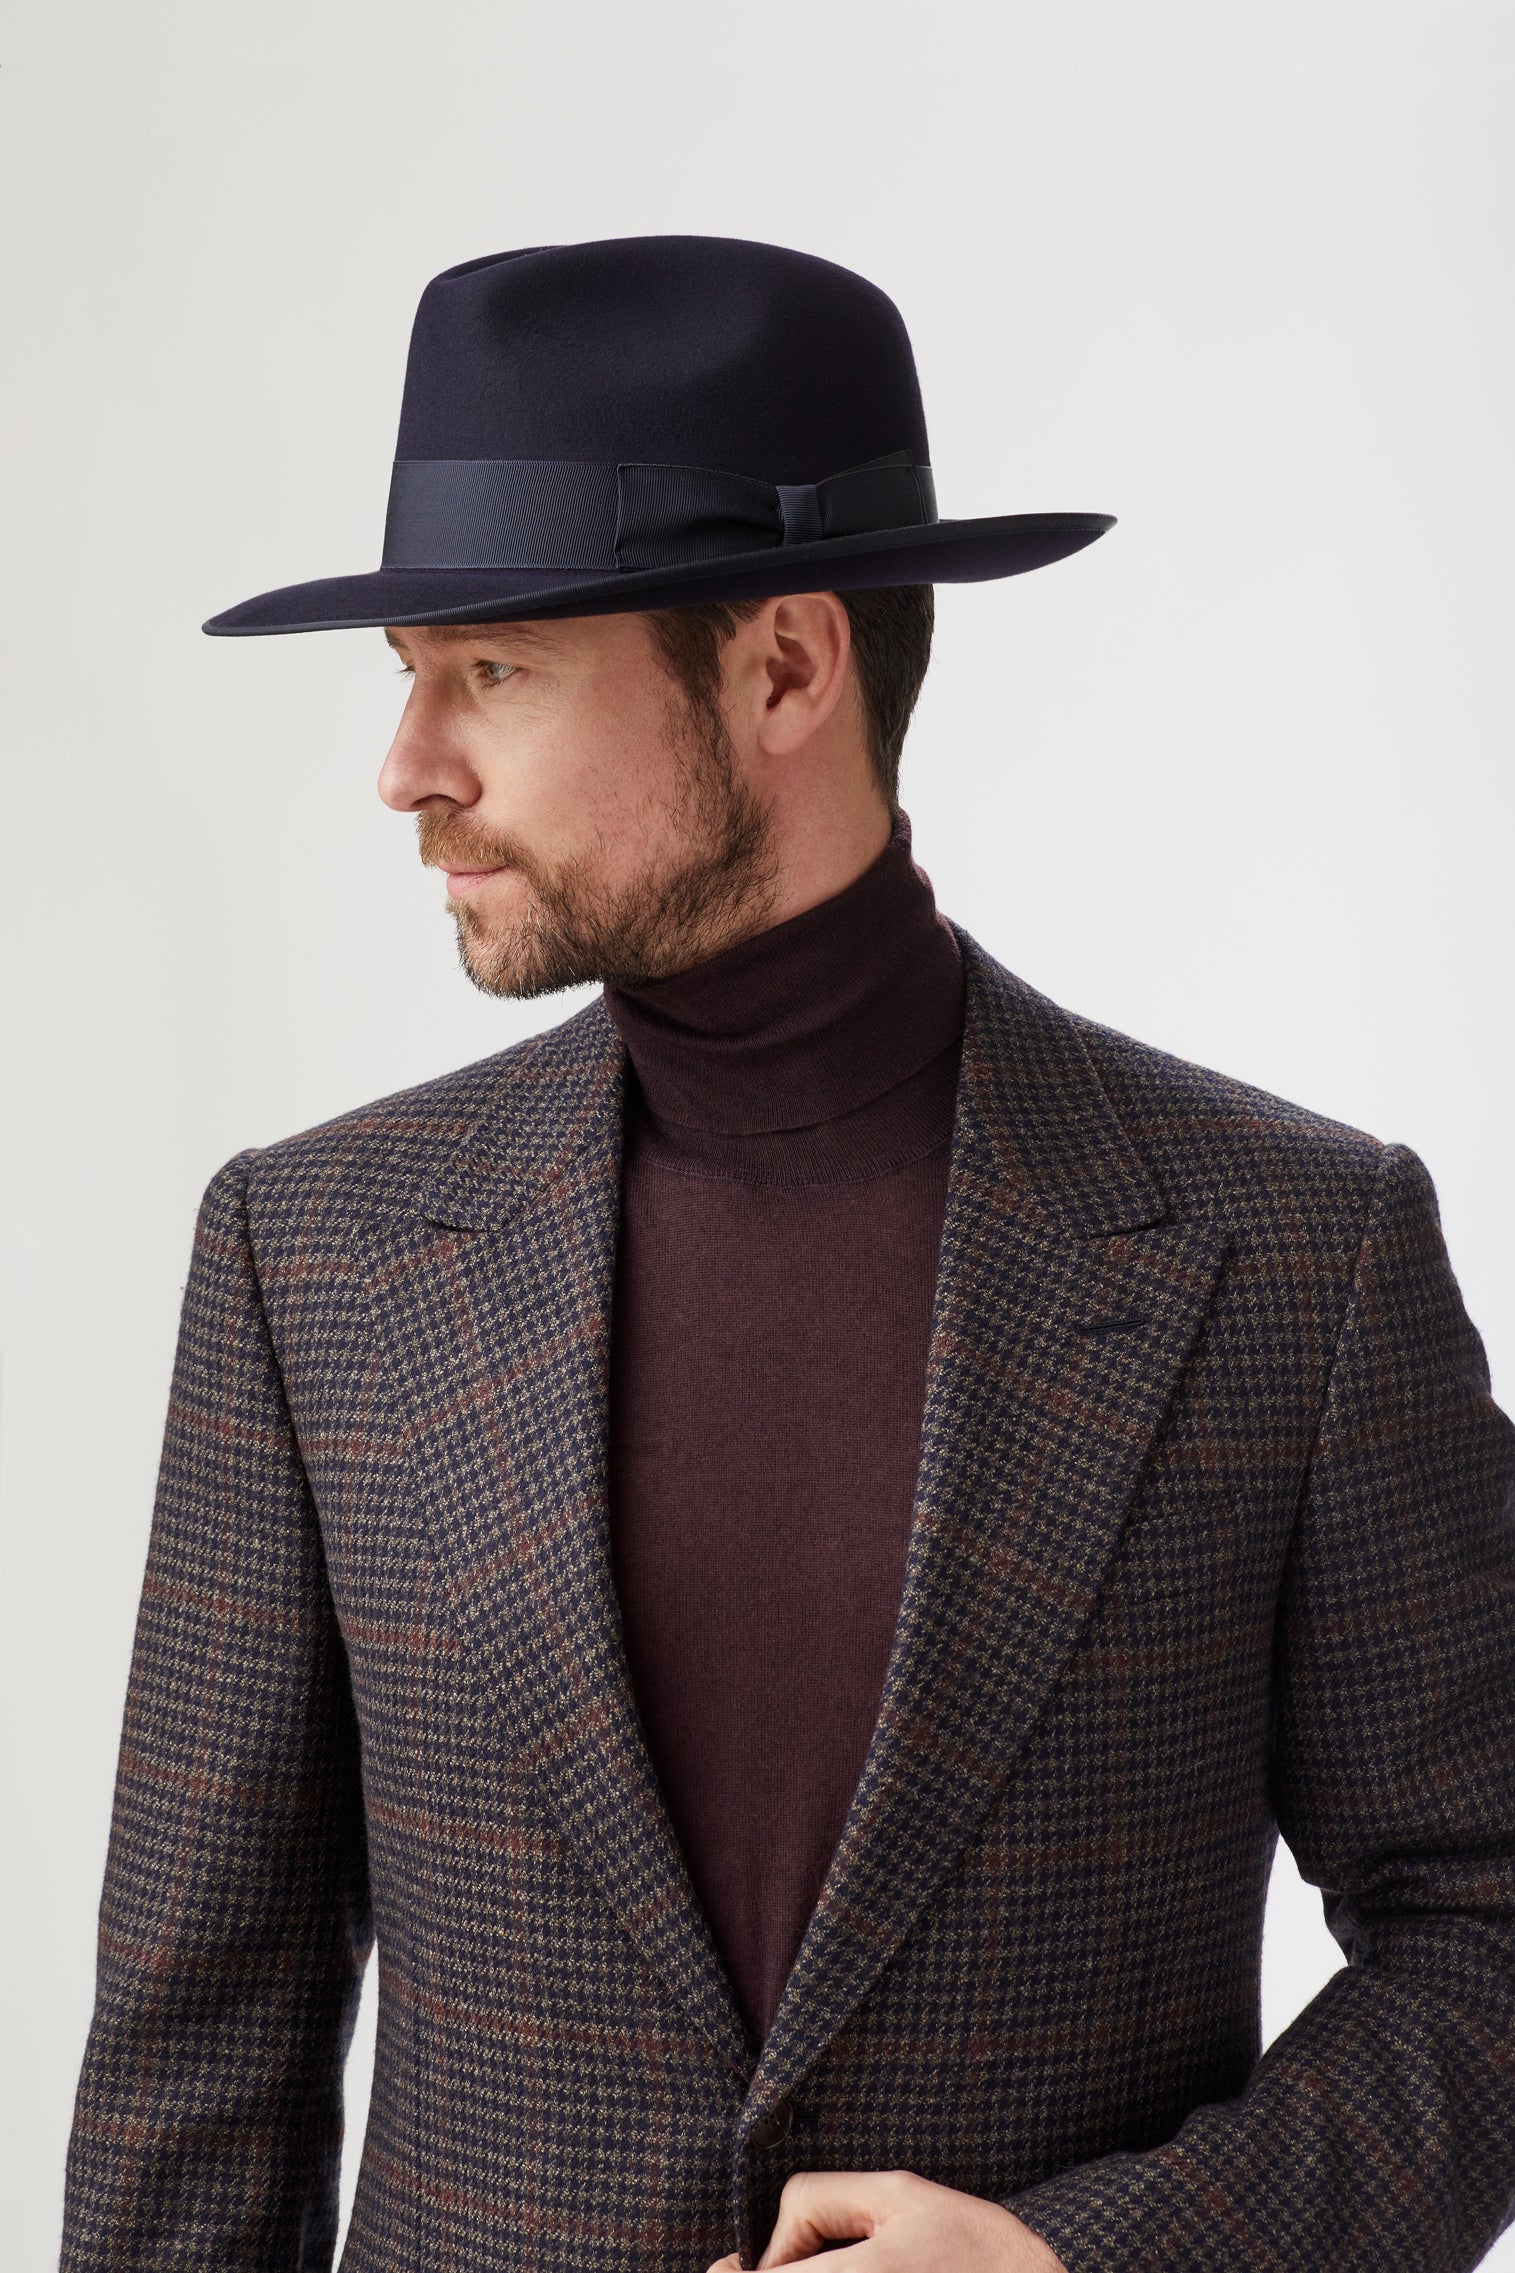 St James's Fedora - Hats for Square Face Shapes - Lock & Co. Hatters London UK